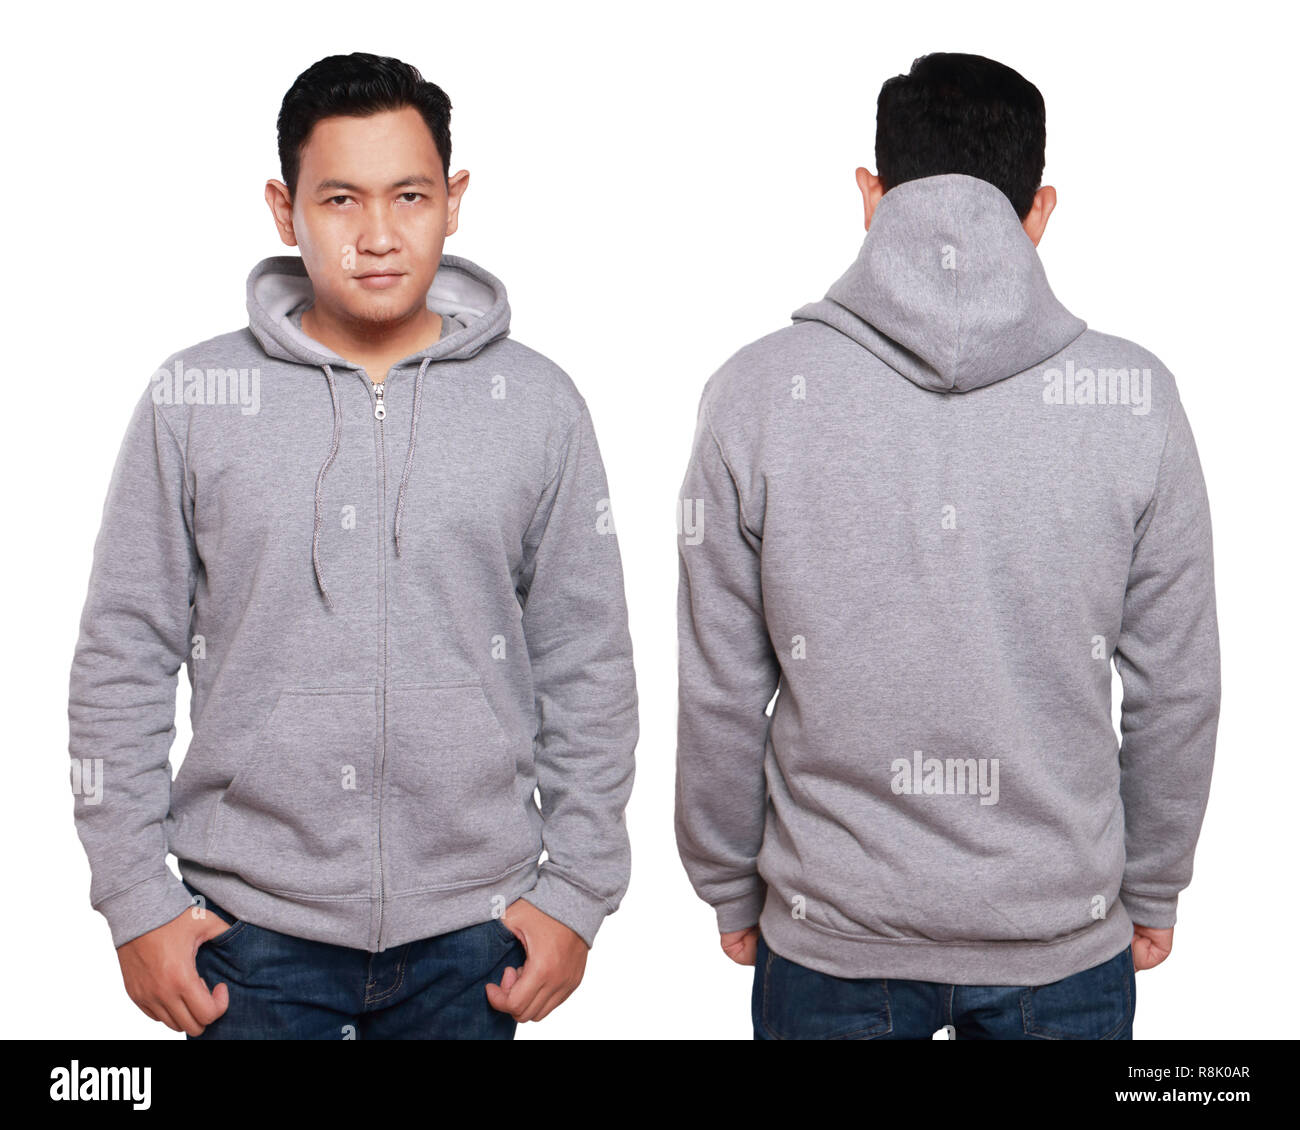 Blank sweatshirt mock up, front, and back view, isolated on white. Asian male model wear plain gray hoodie mockup. Hoody design presentation. Jumper f Stock Photo